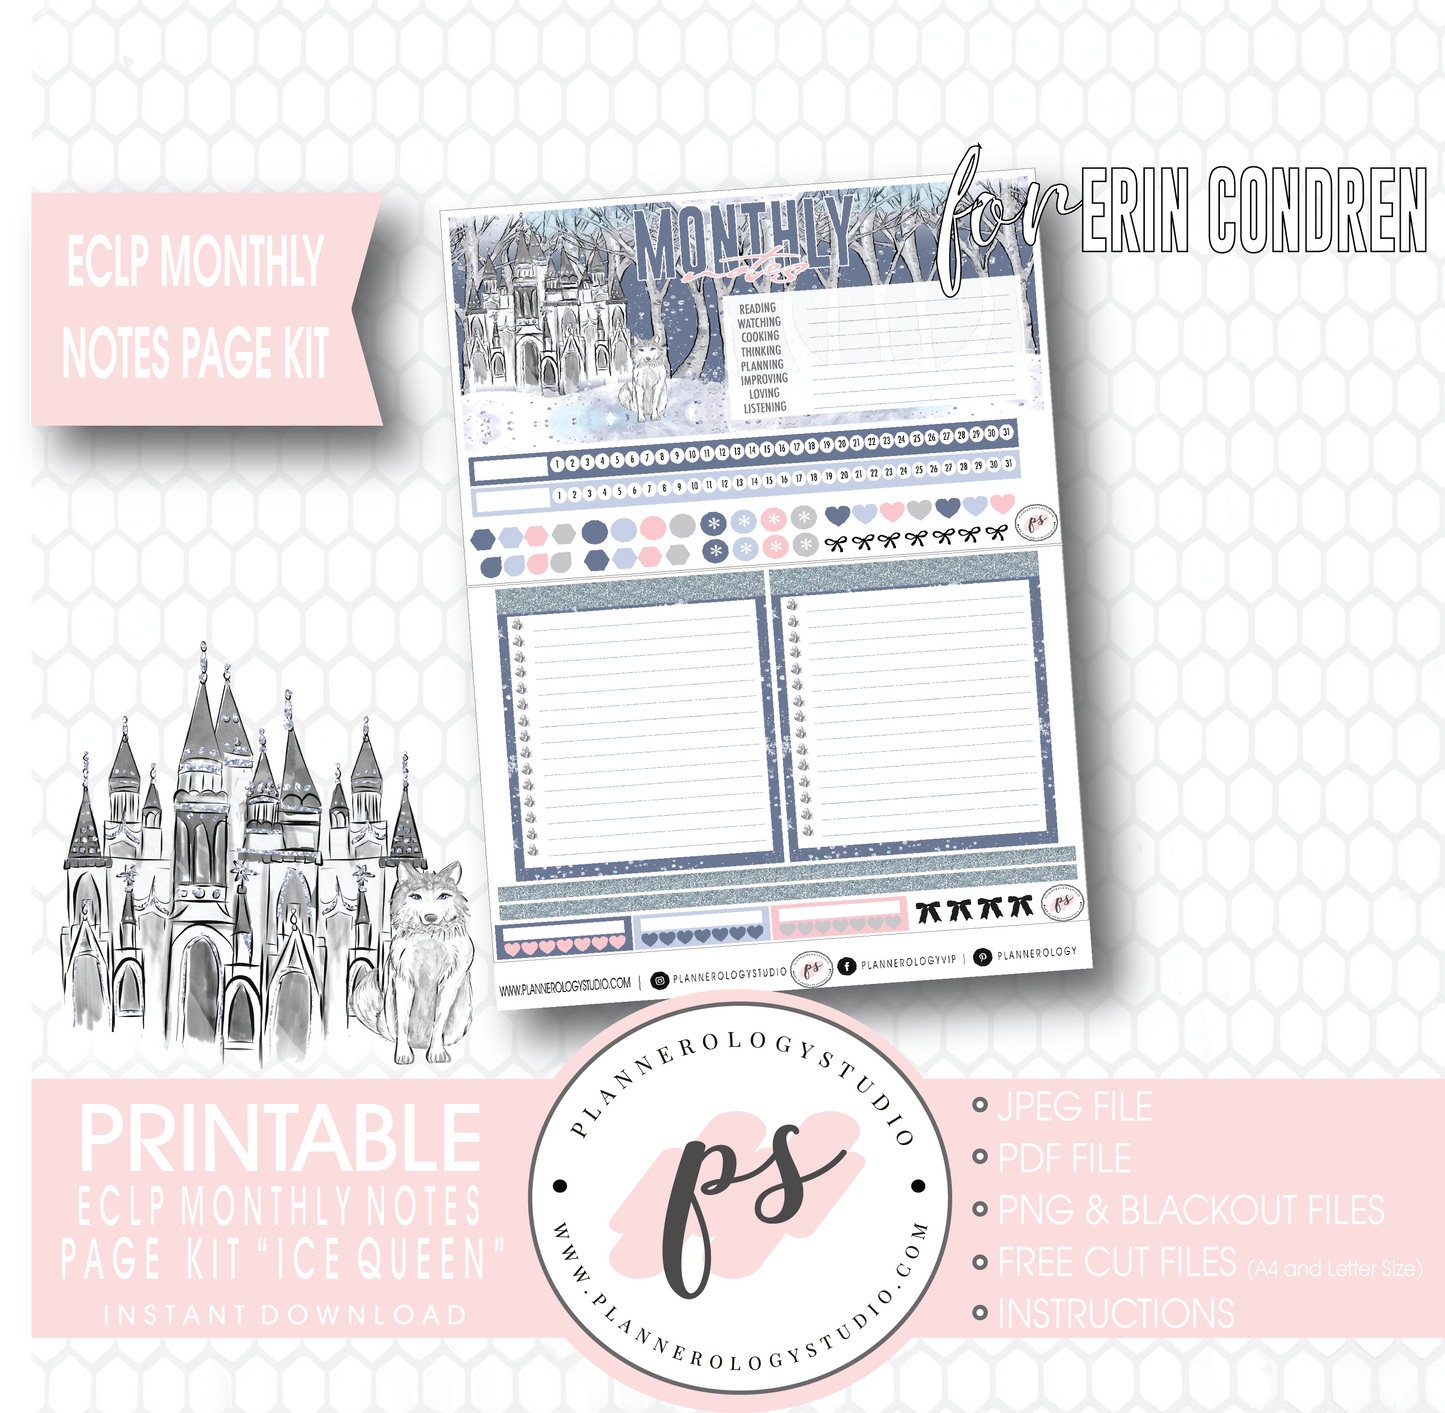 Ice Queen Monthly Notes Page Kit Digital Printable Planner Stickers (for use with Erin Condren) - Plannerologystudio